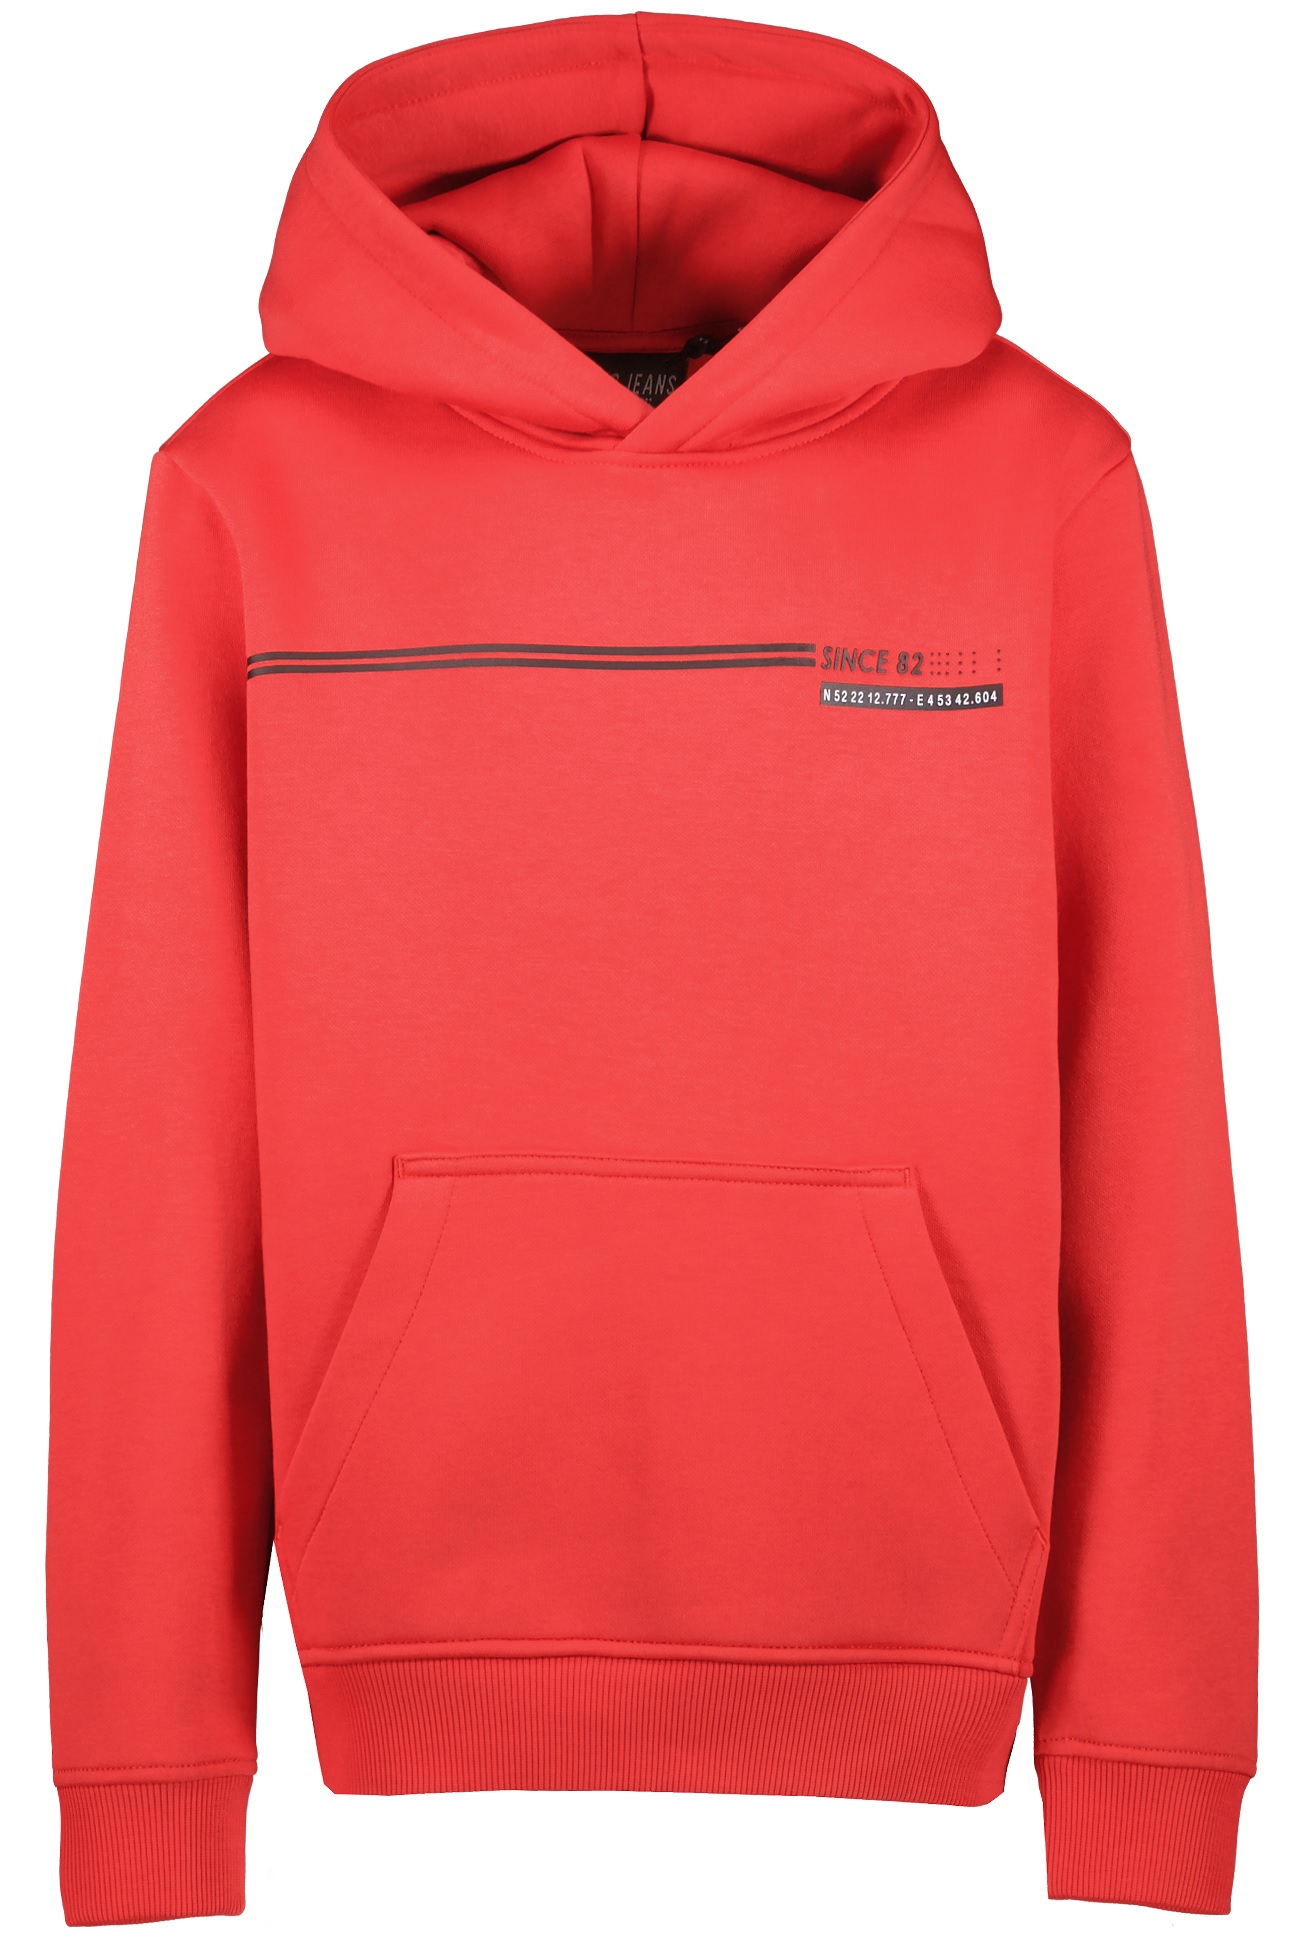 Cars Jeans Roox sw hood red 5734660